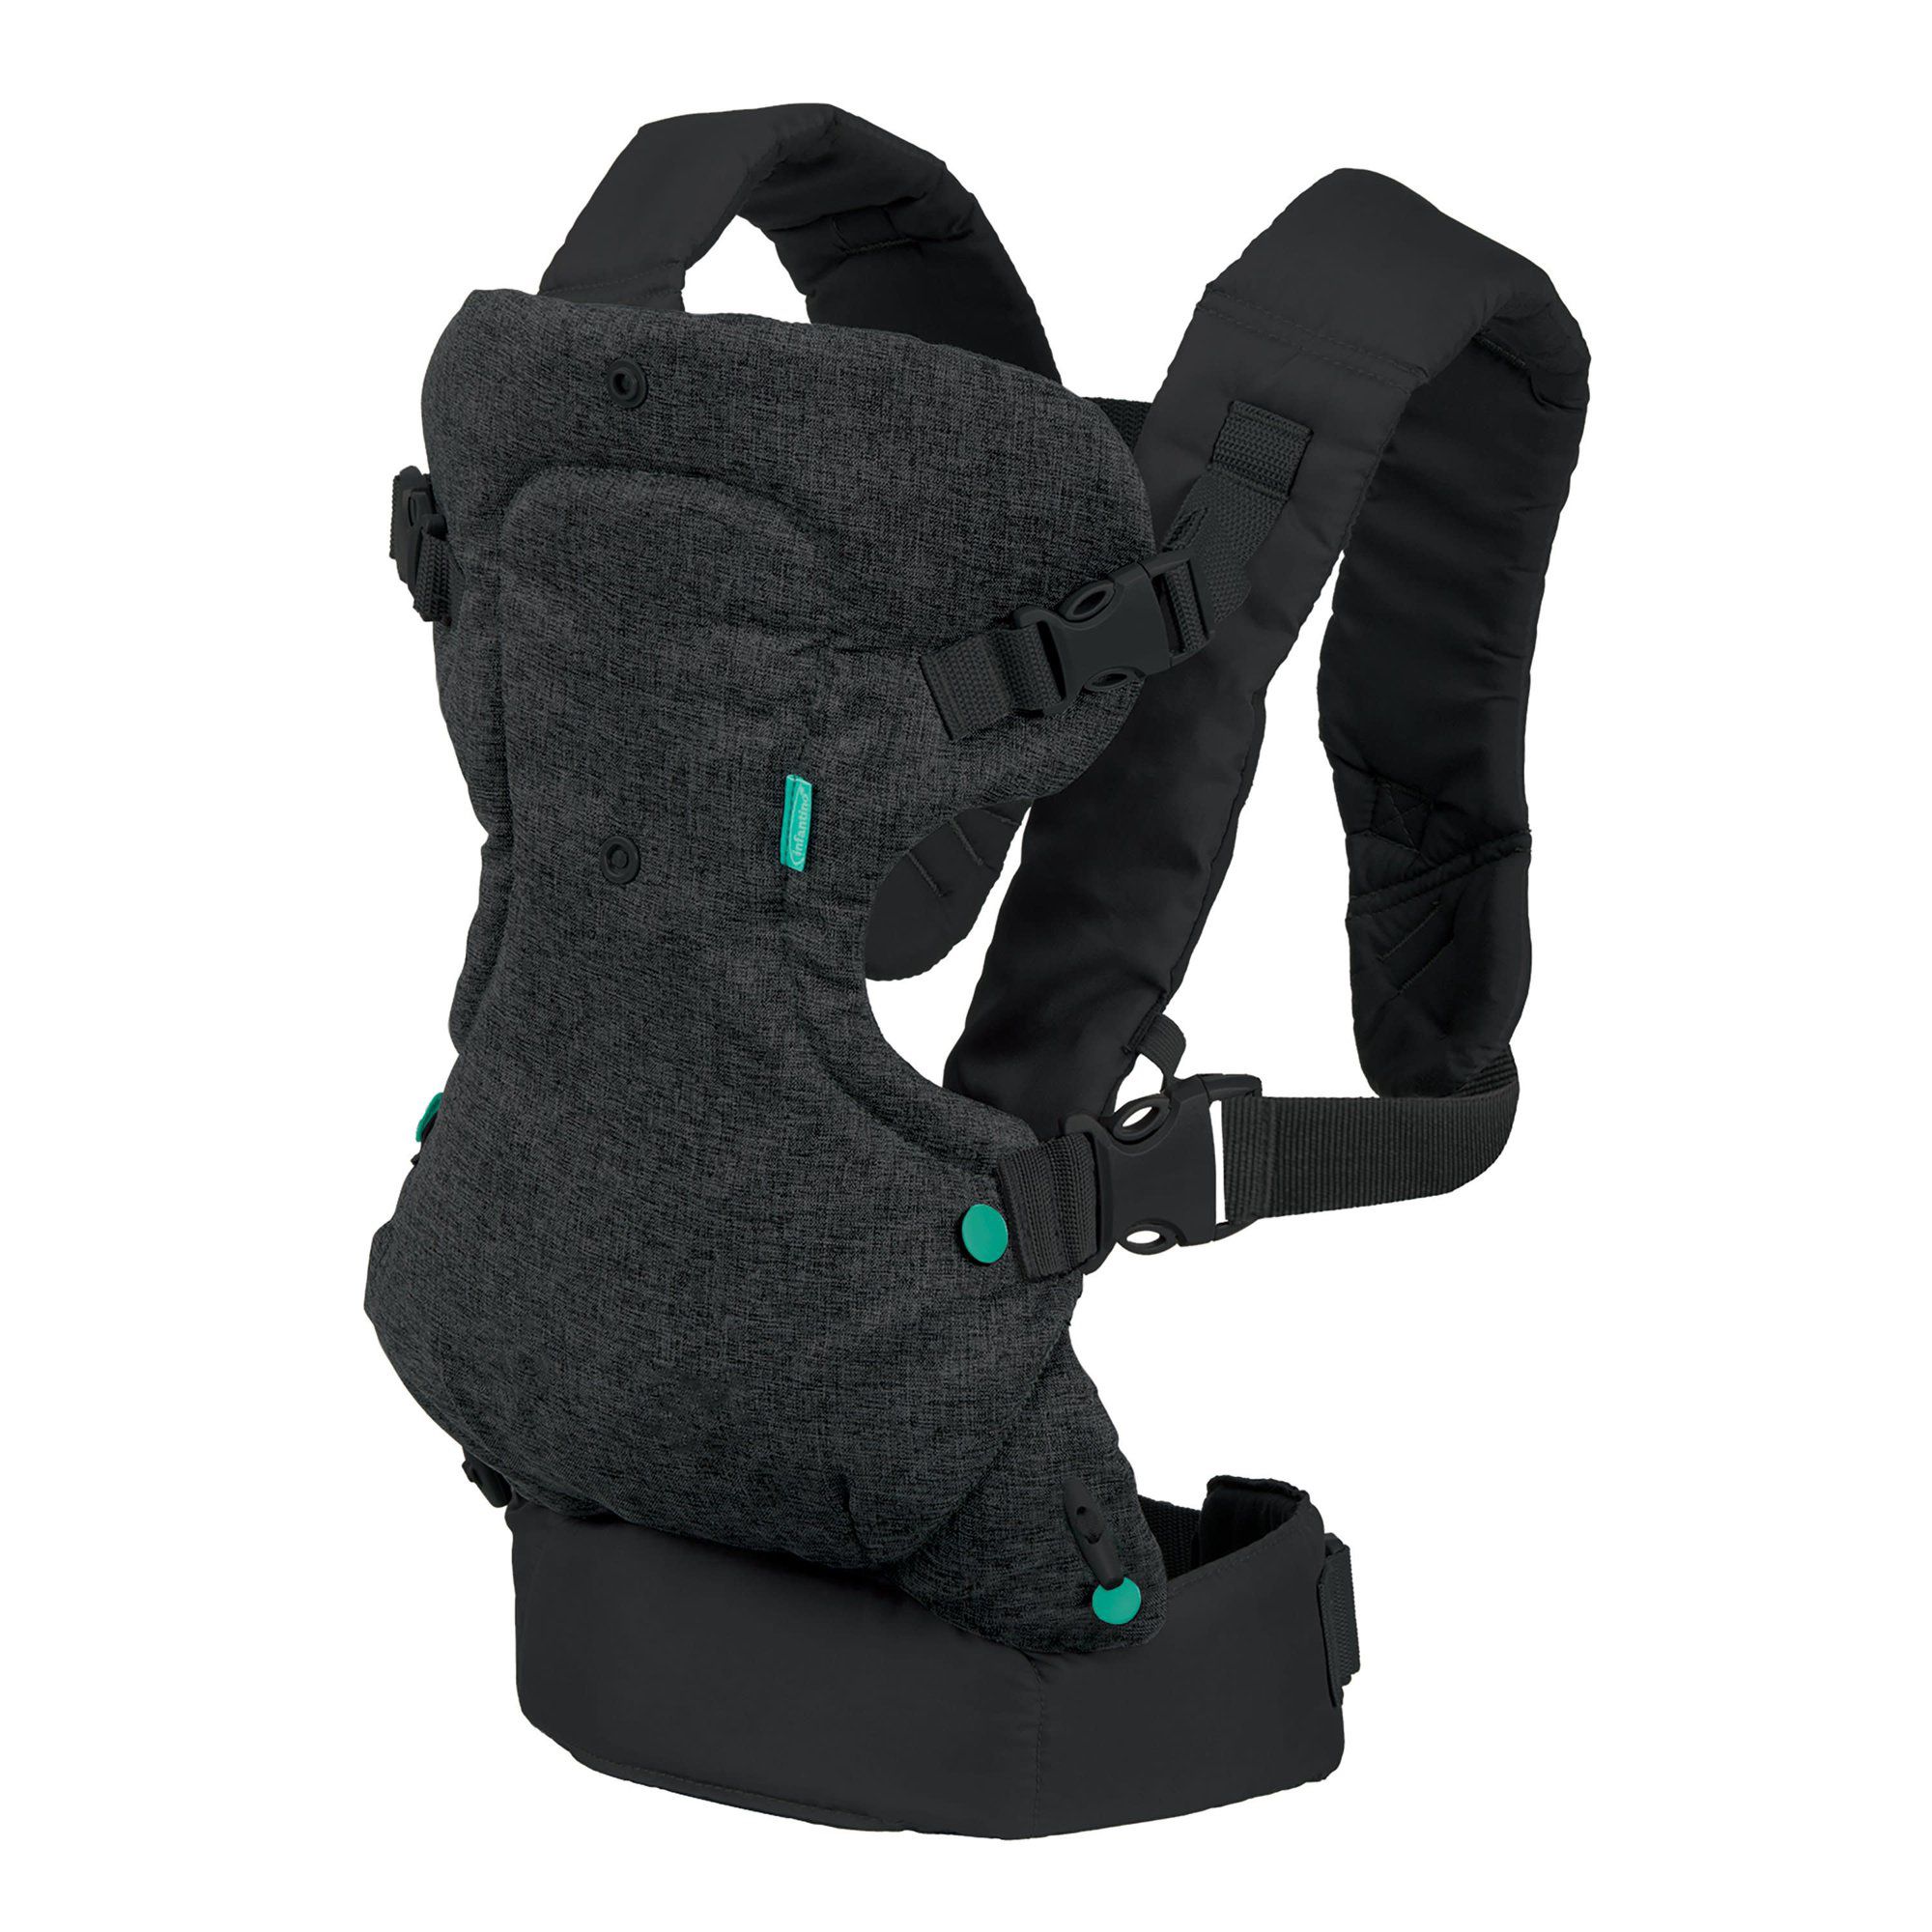 Inflantino 4 In 1 FLIP Baby Carrier 